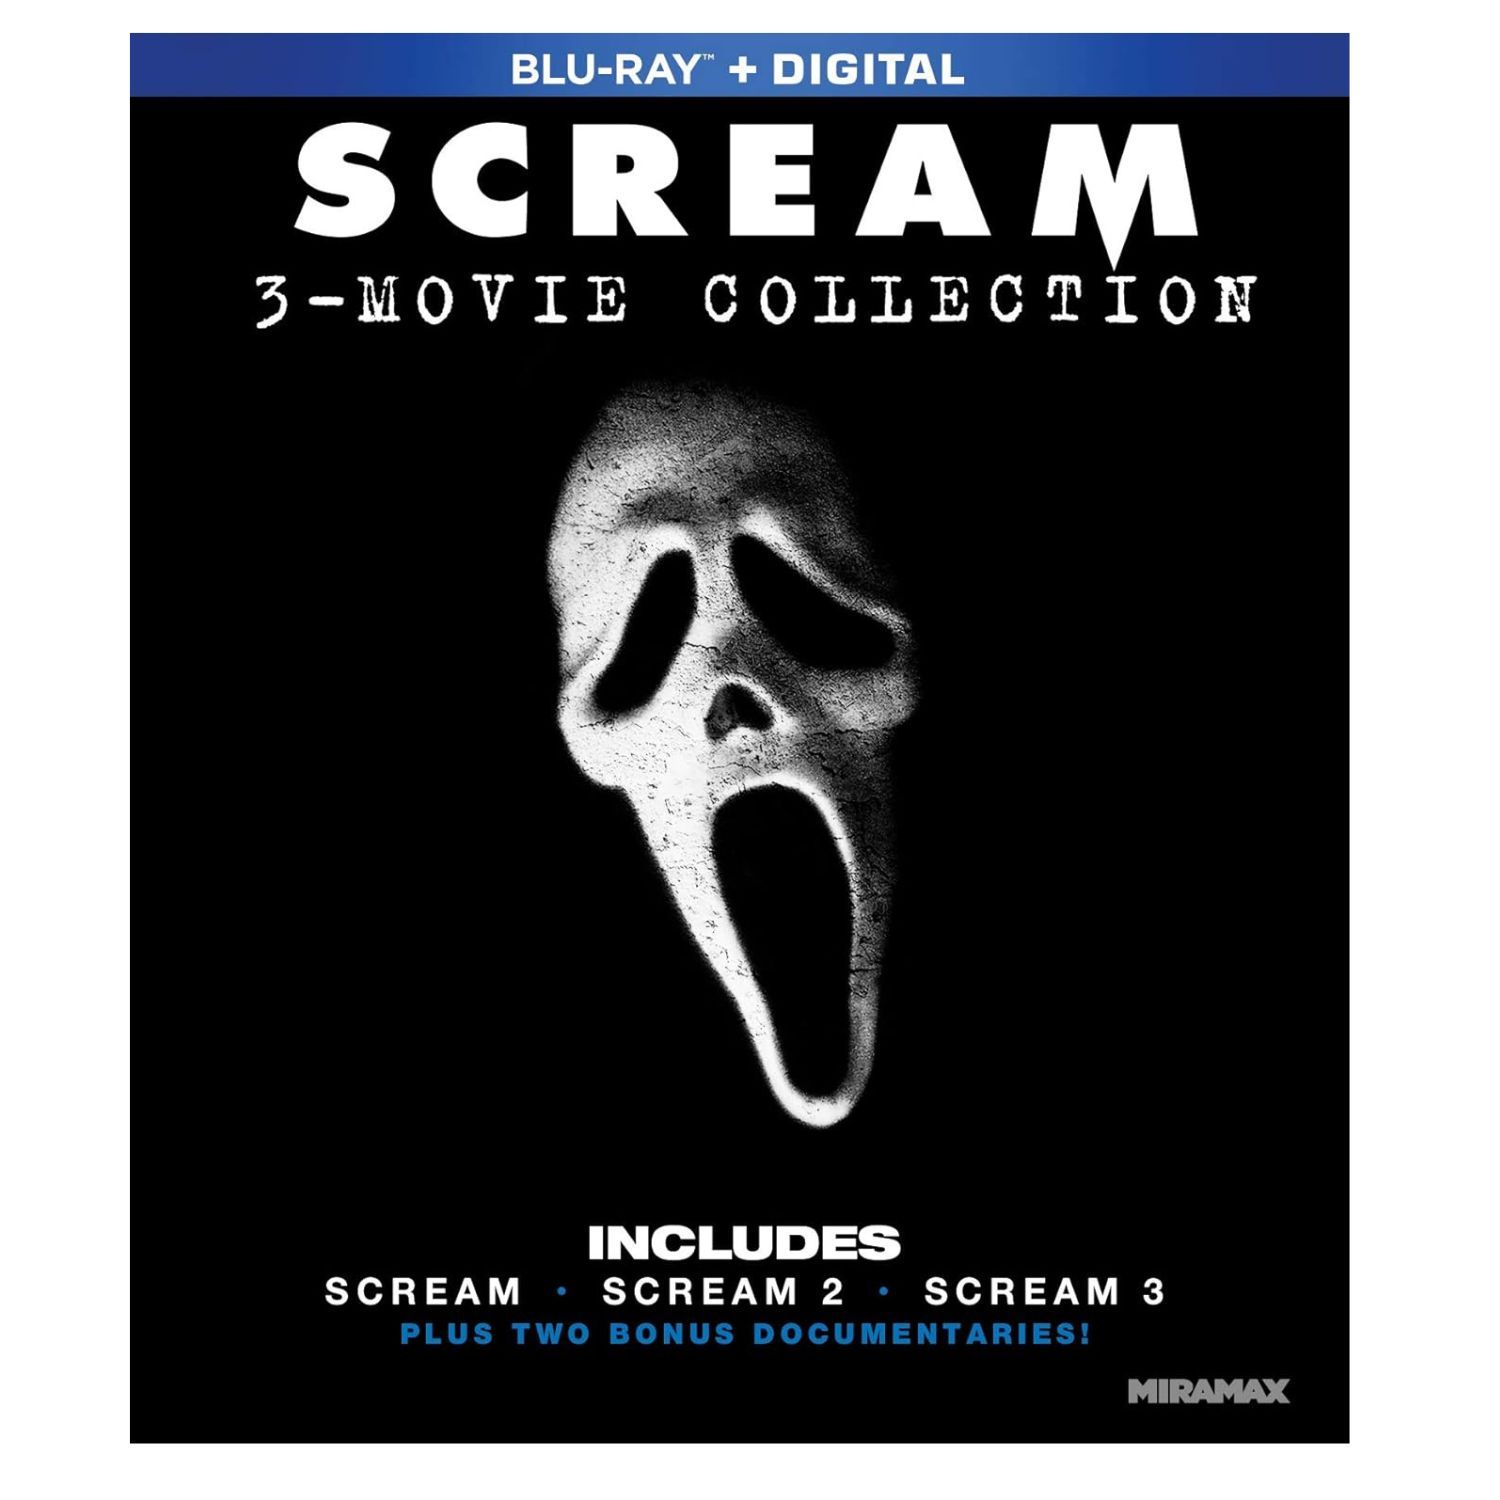 Scream: 3-Movie Collection on Blu-Ray